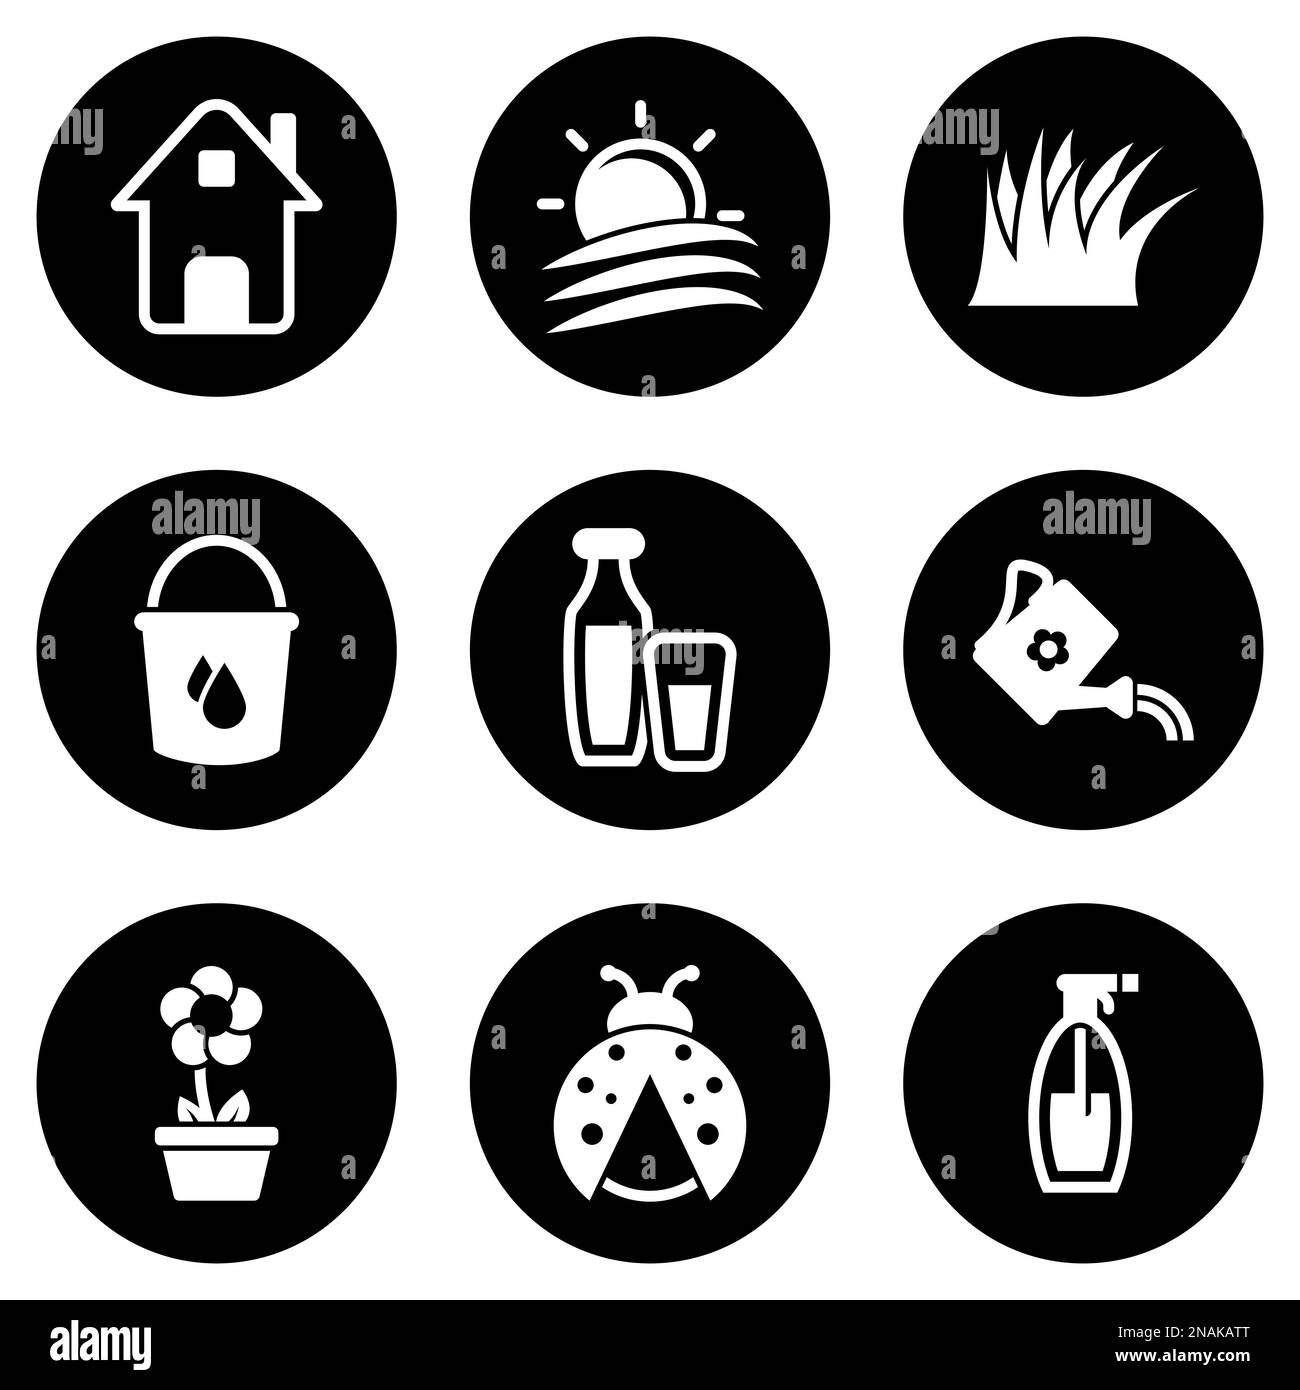 Set of simple icons on a theme House, plot, farming, farming, vector, set. White background Stock Vector